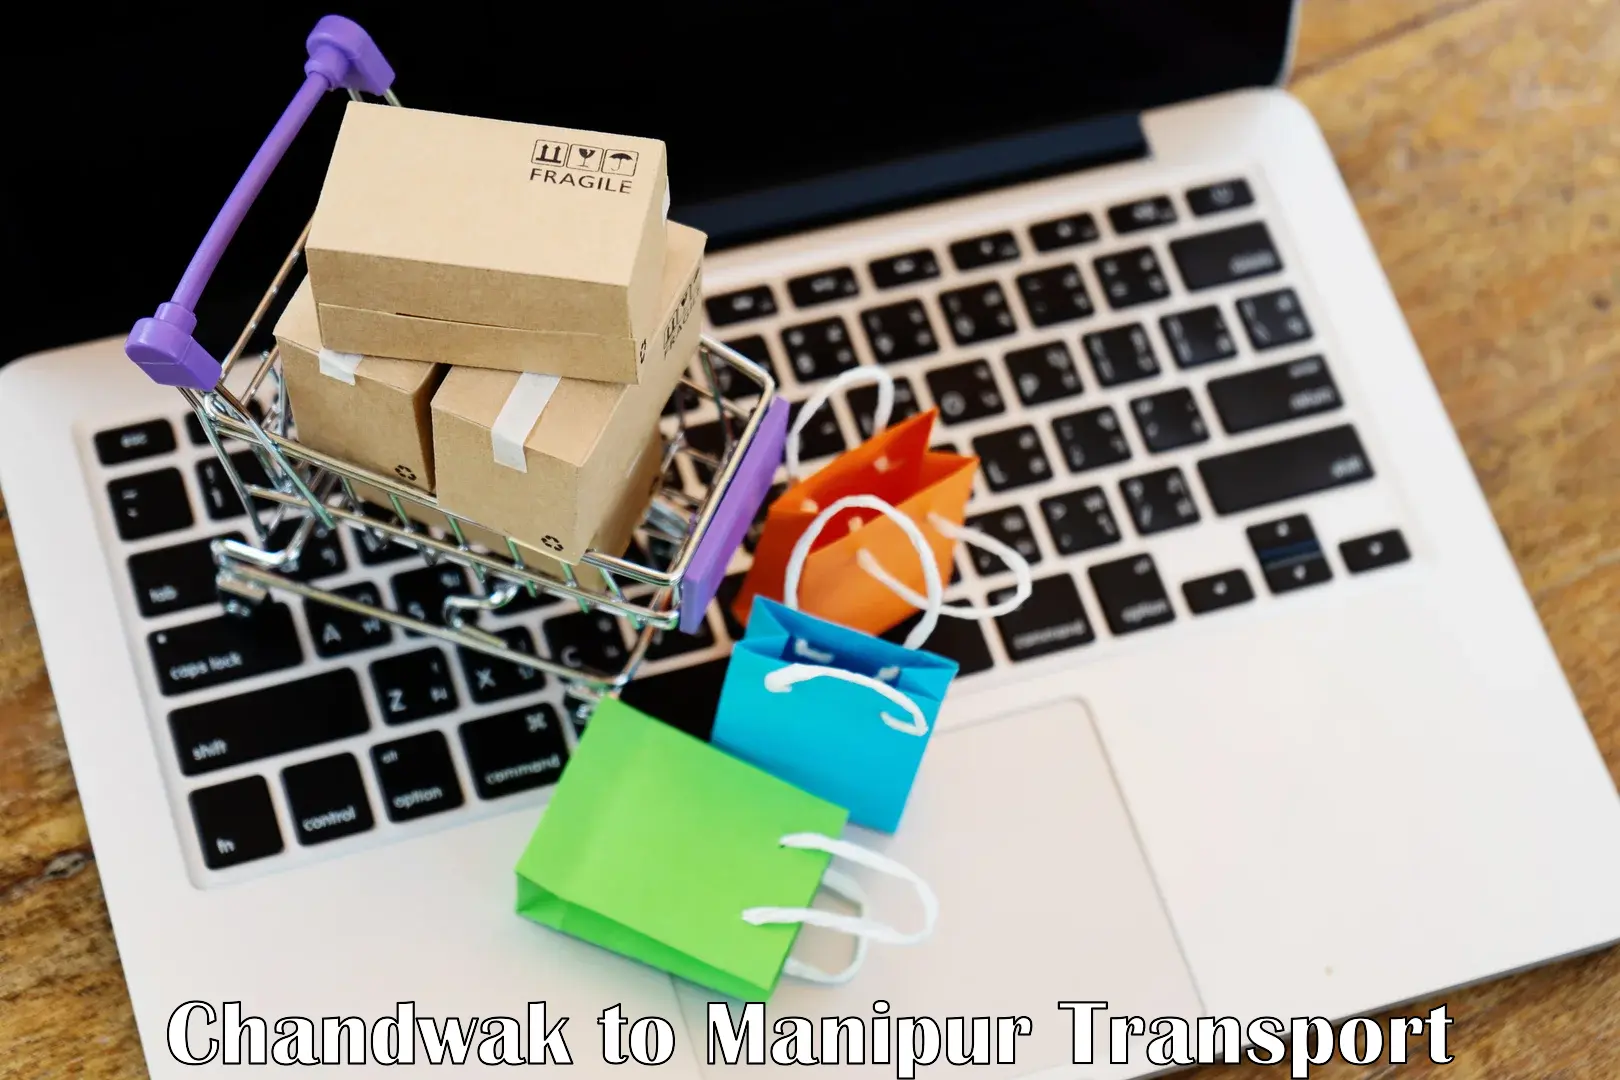 Nationwide transport services Chandwak to Manipur